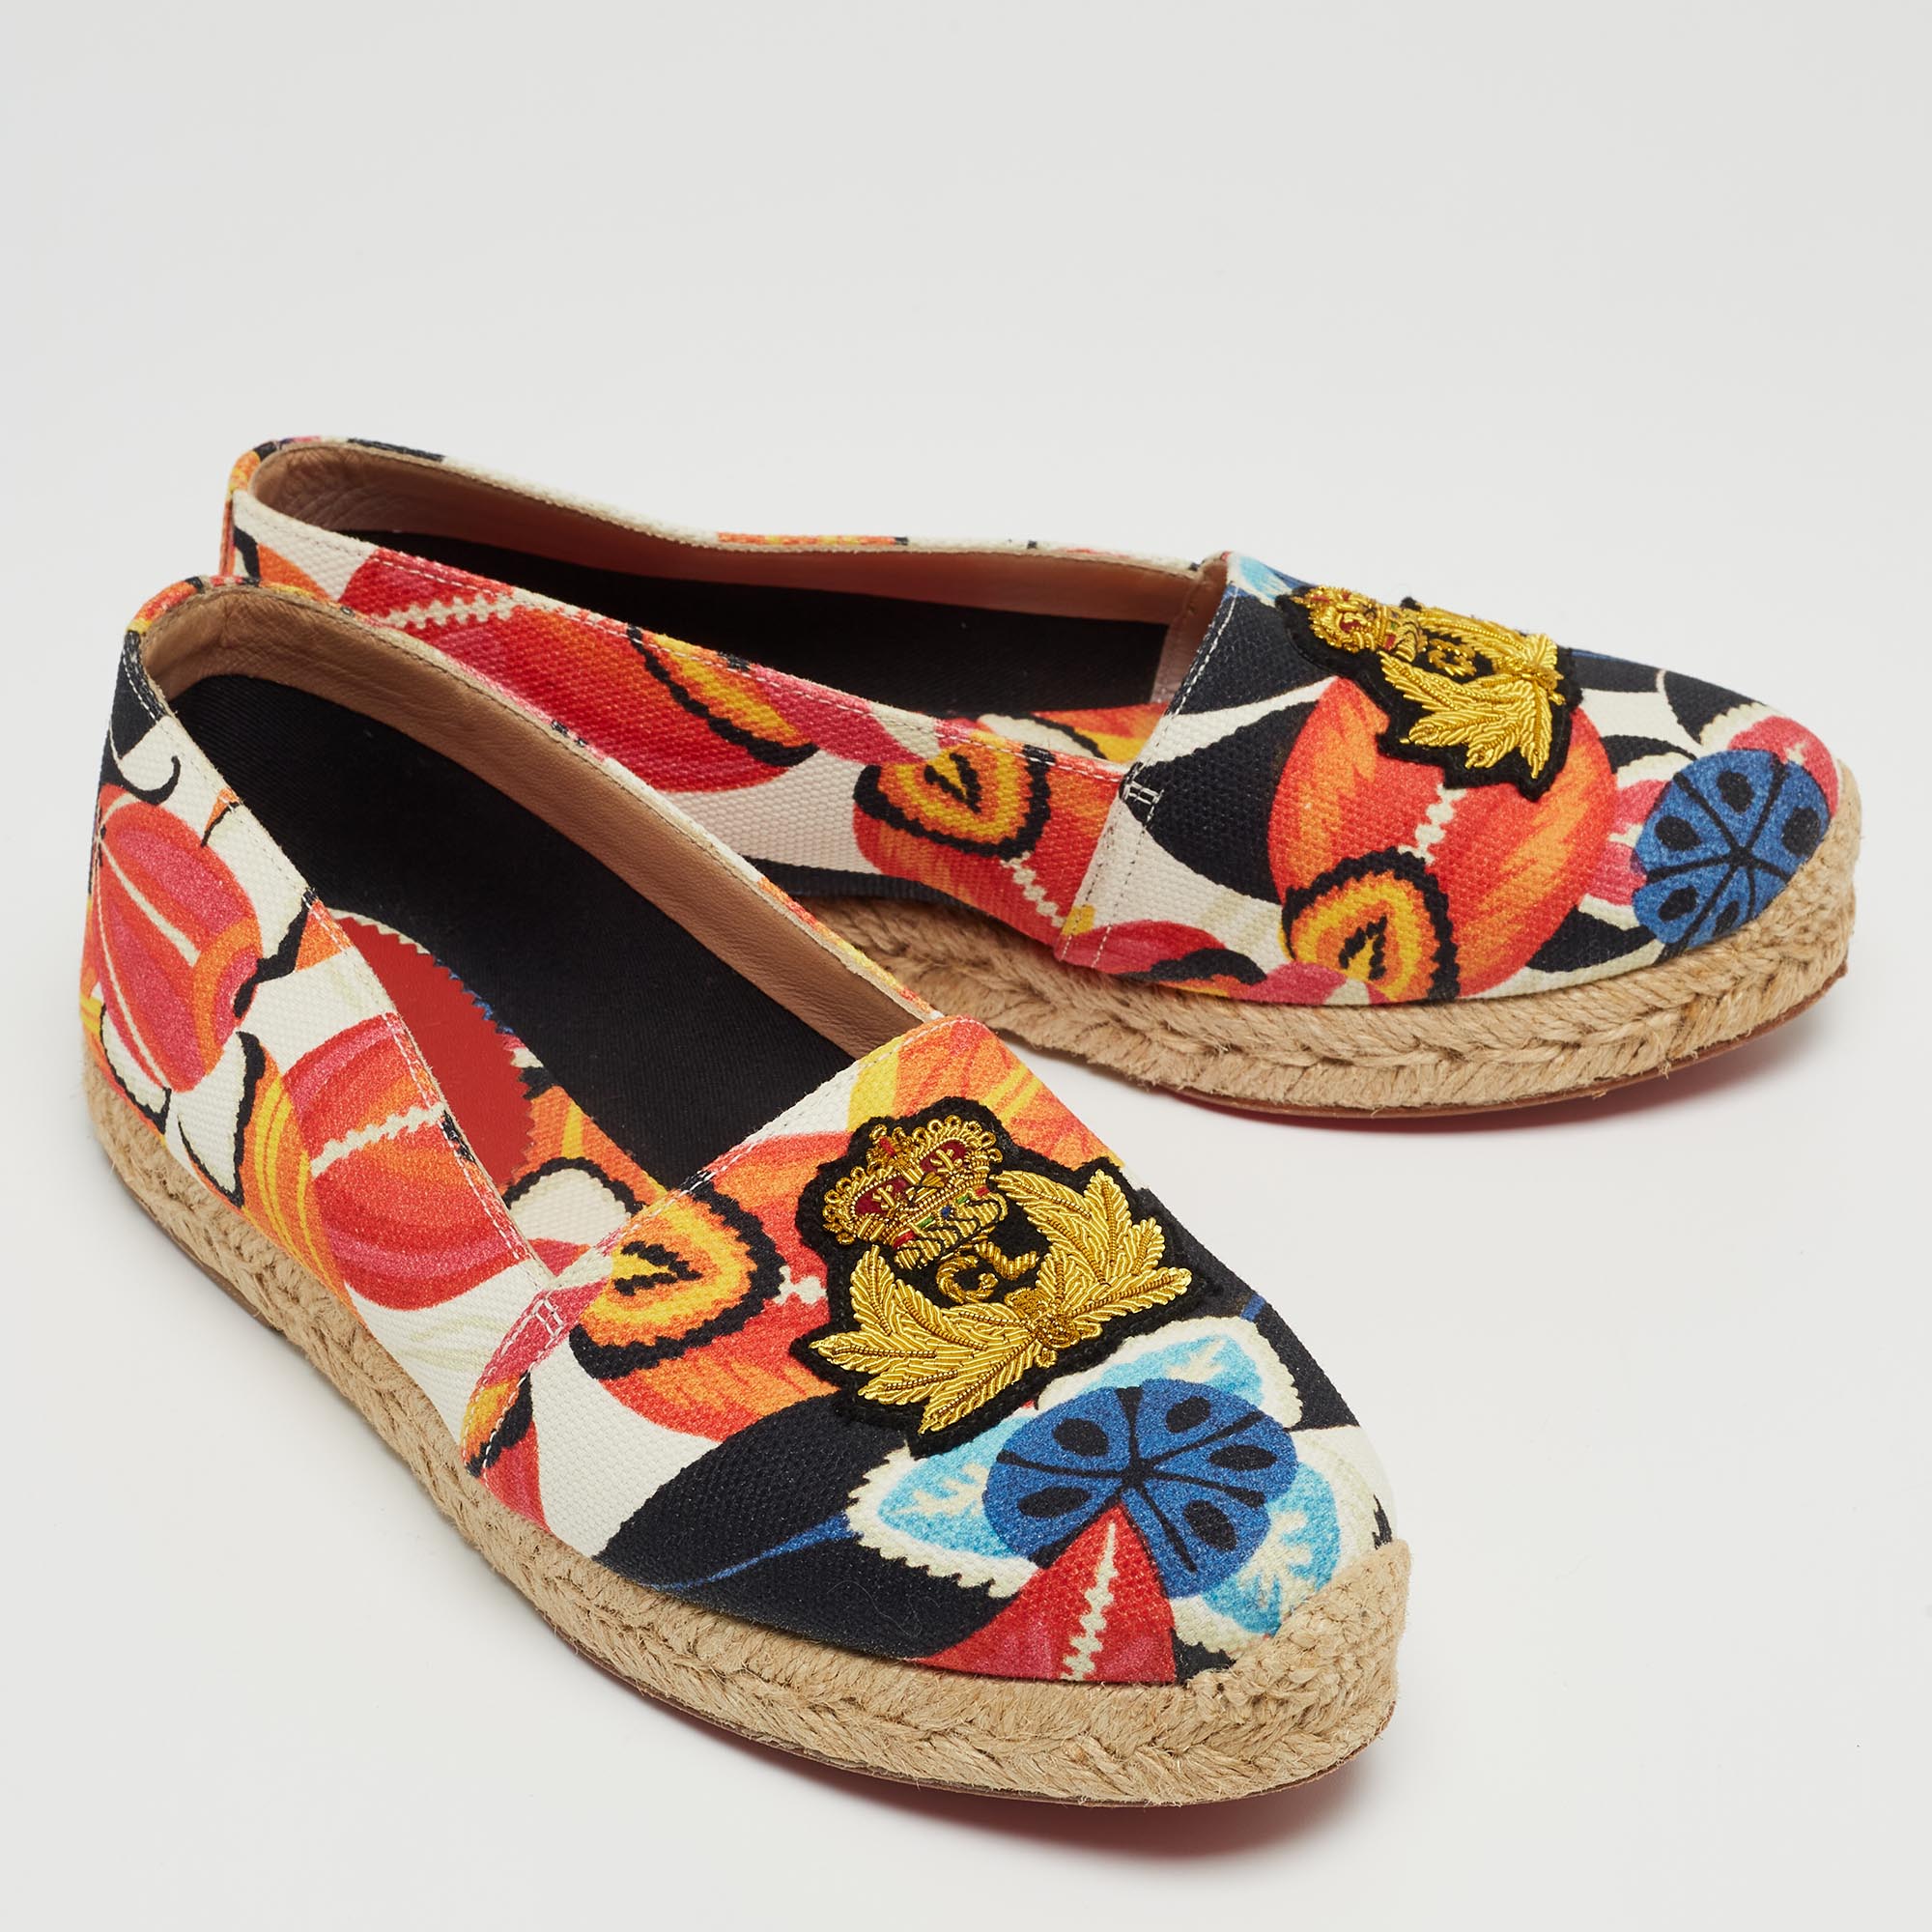 Christian Louboutin Multicolor Canvas Gala Embroidered Crest Espadrille Flats Size 36